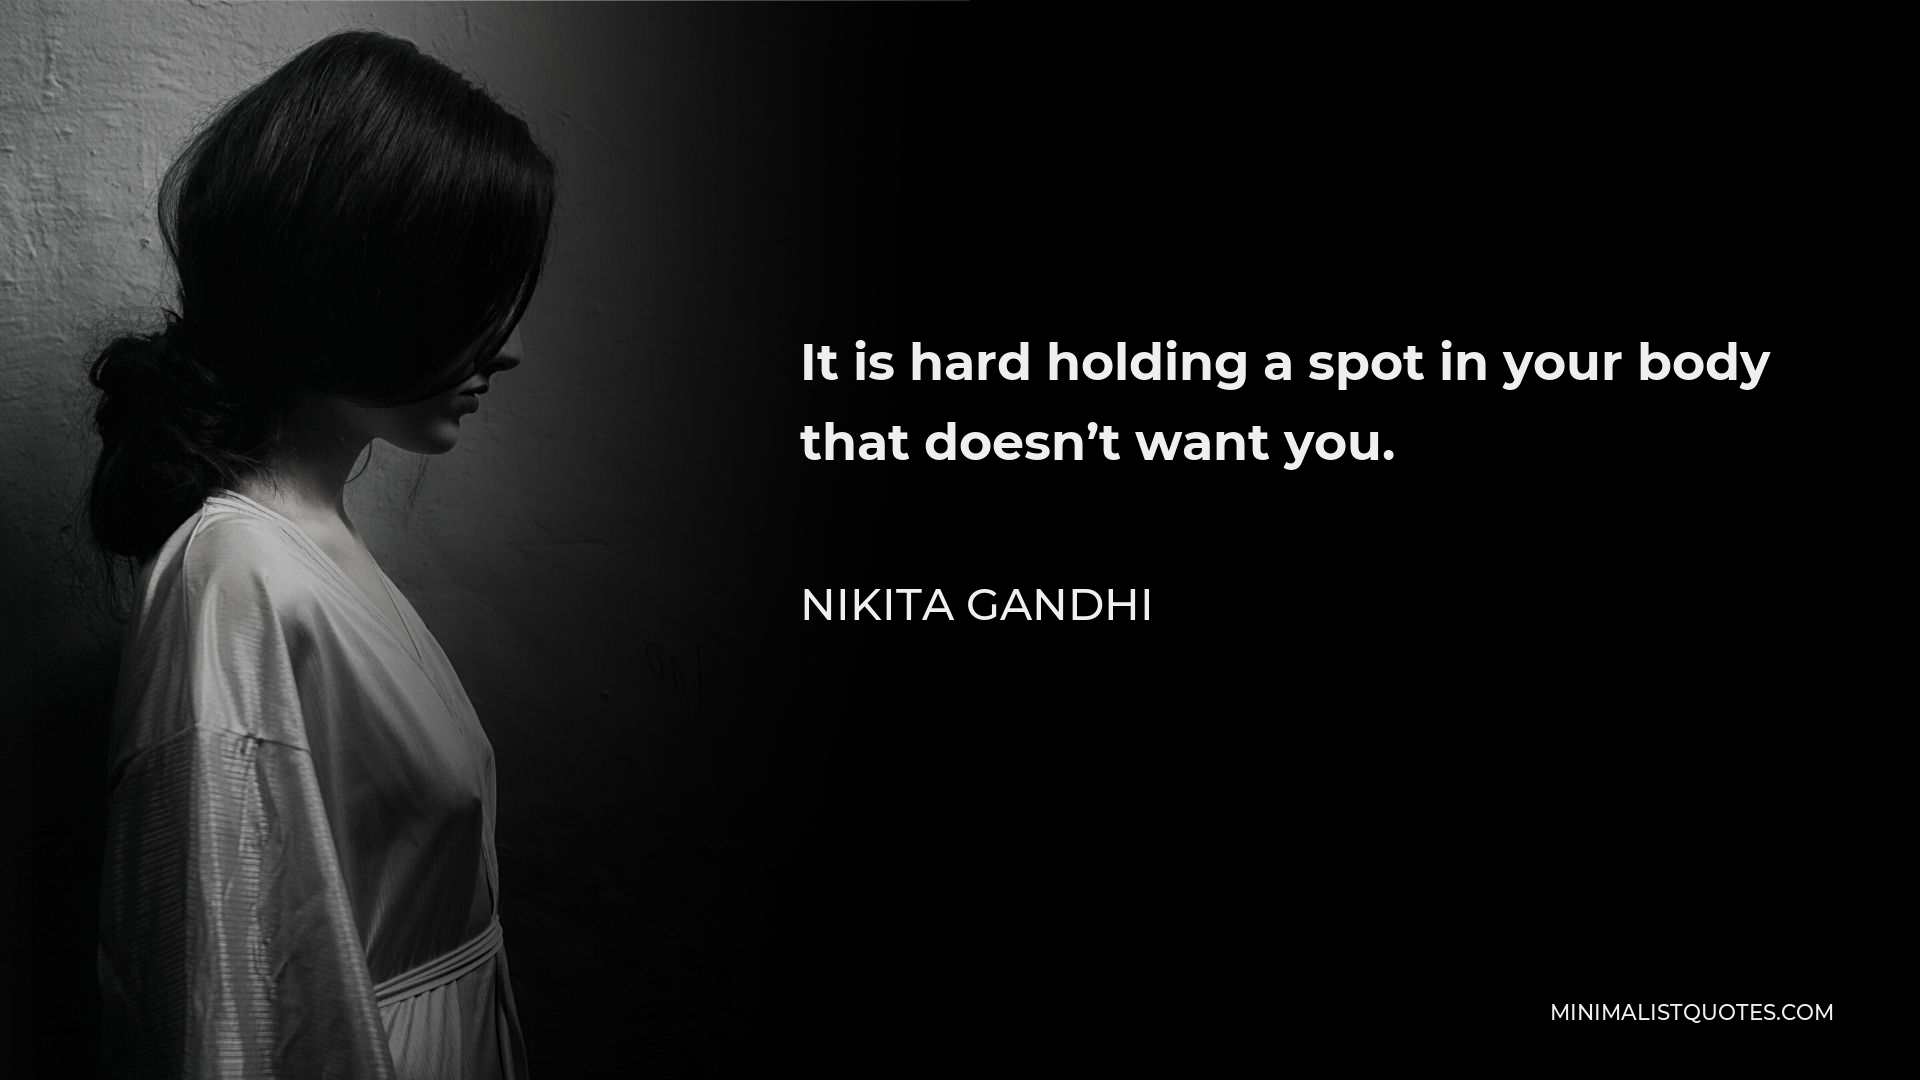 Nikita Gandhi Quote - It is hard holding a spot in your body that doesn’t want you.